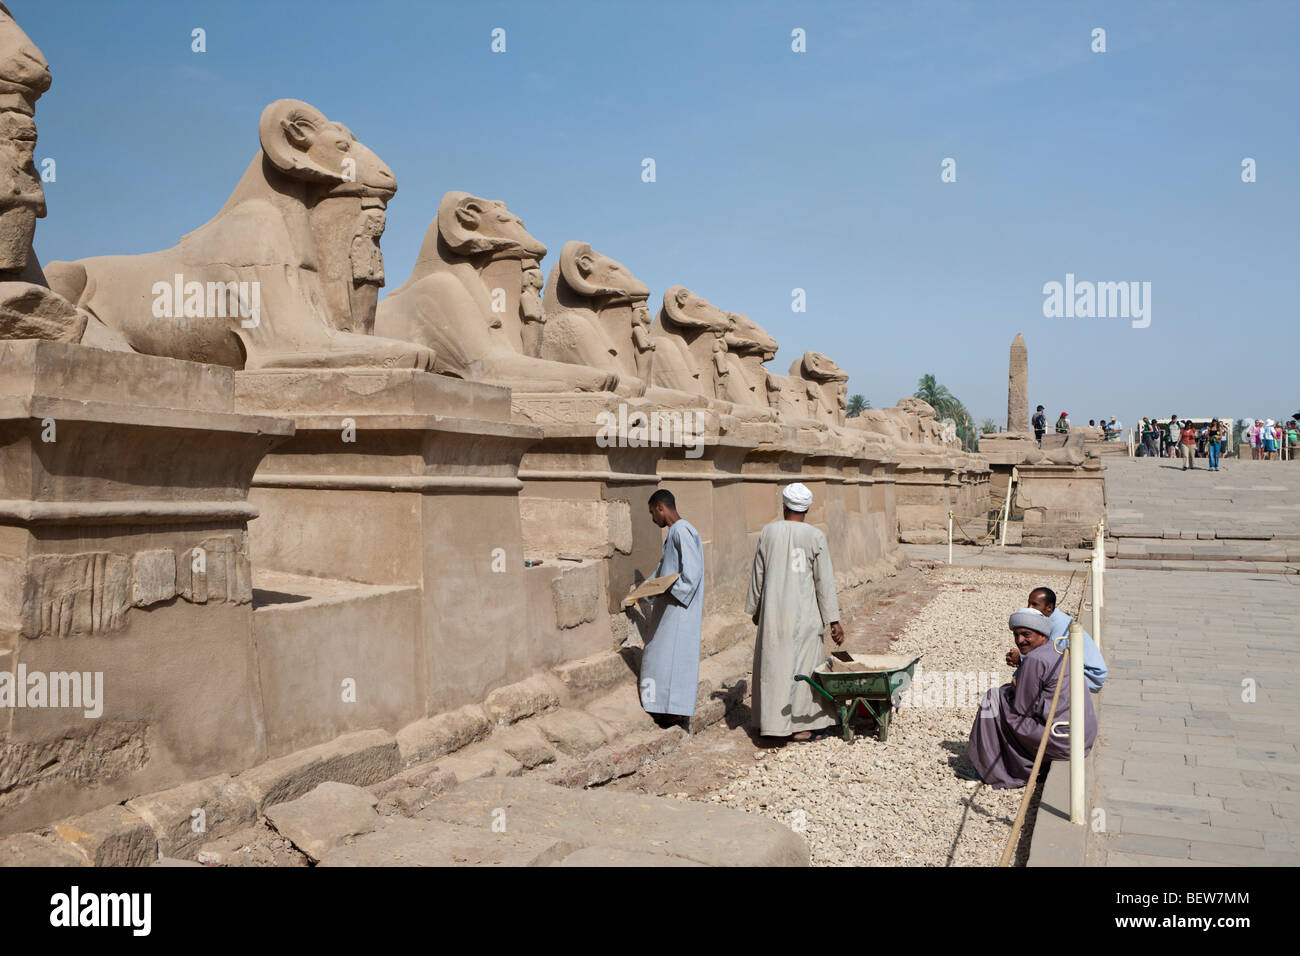 Worker restore Row of Ram-headed Sphinxes at Karnak Temple, Luxor, Egypt Stock Photo